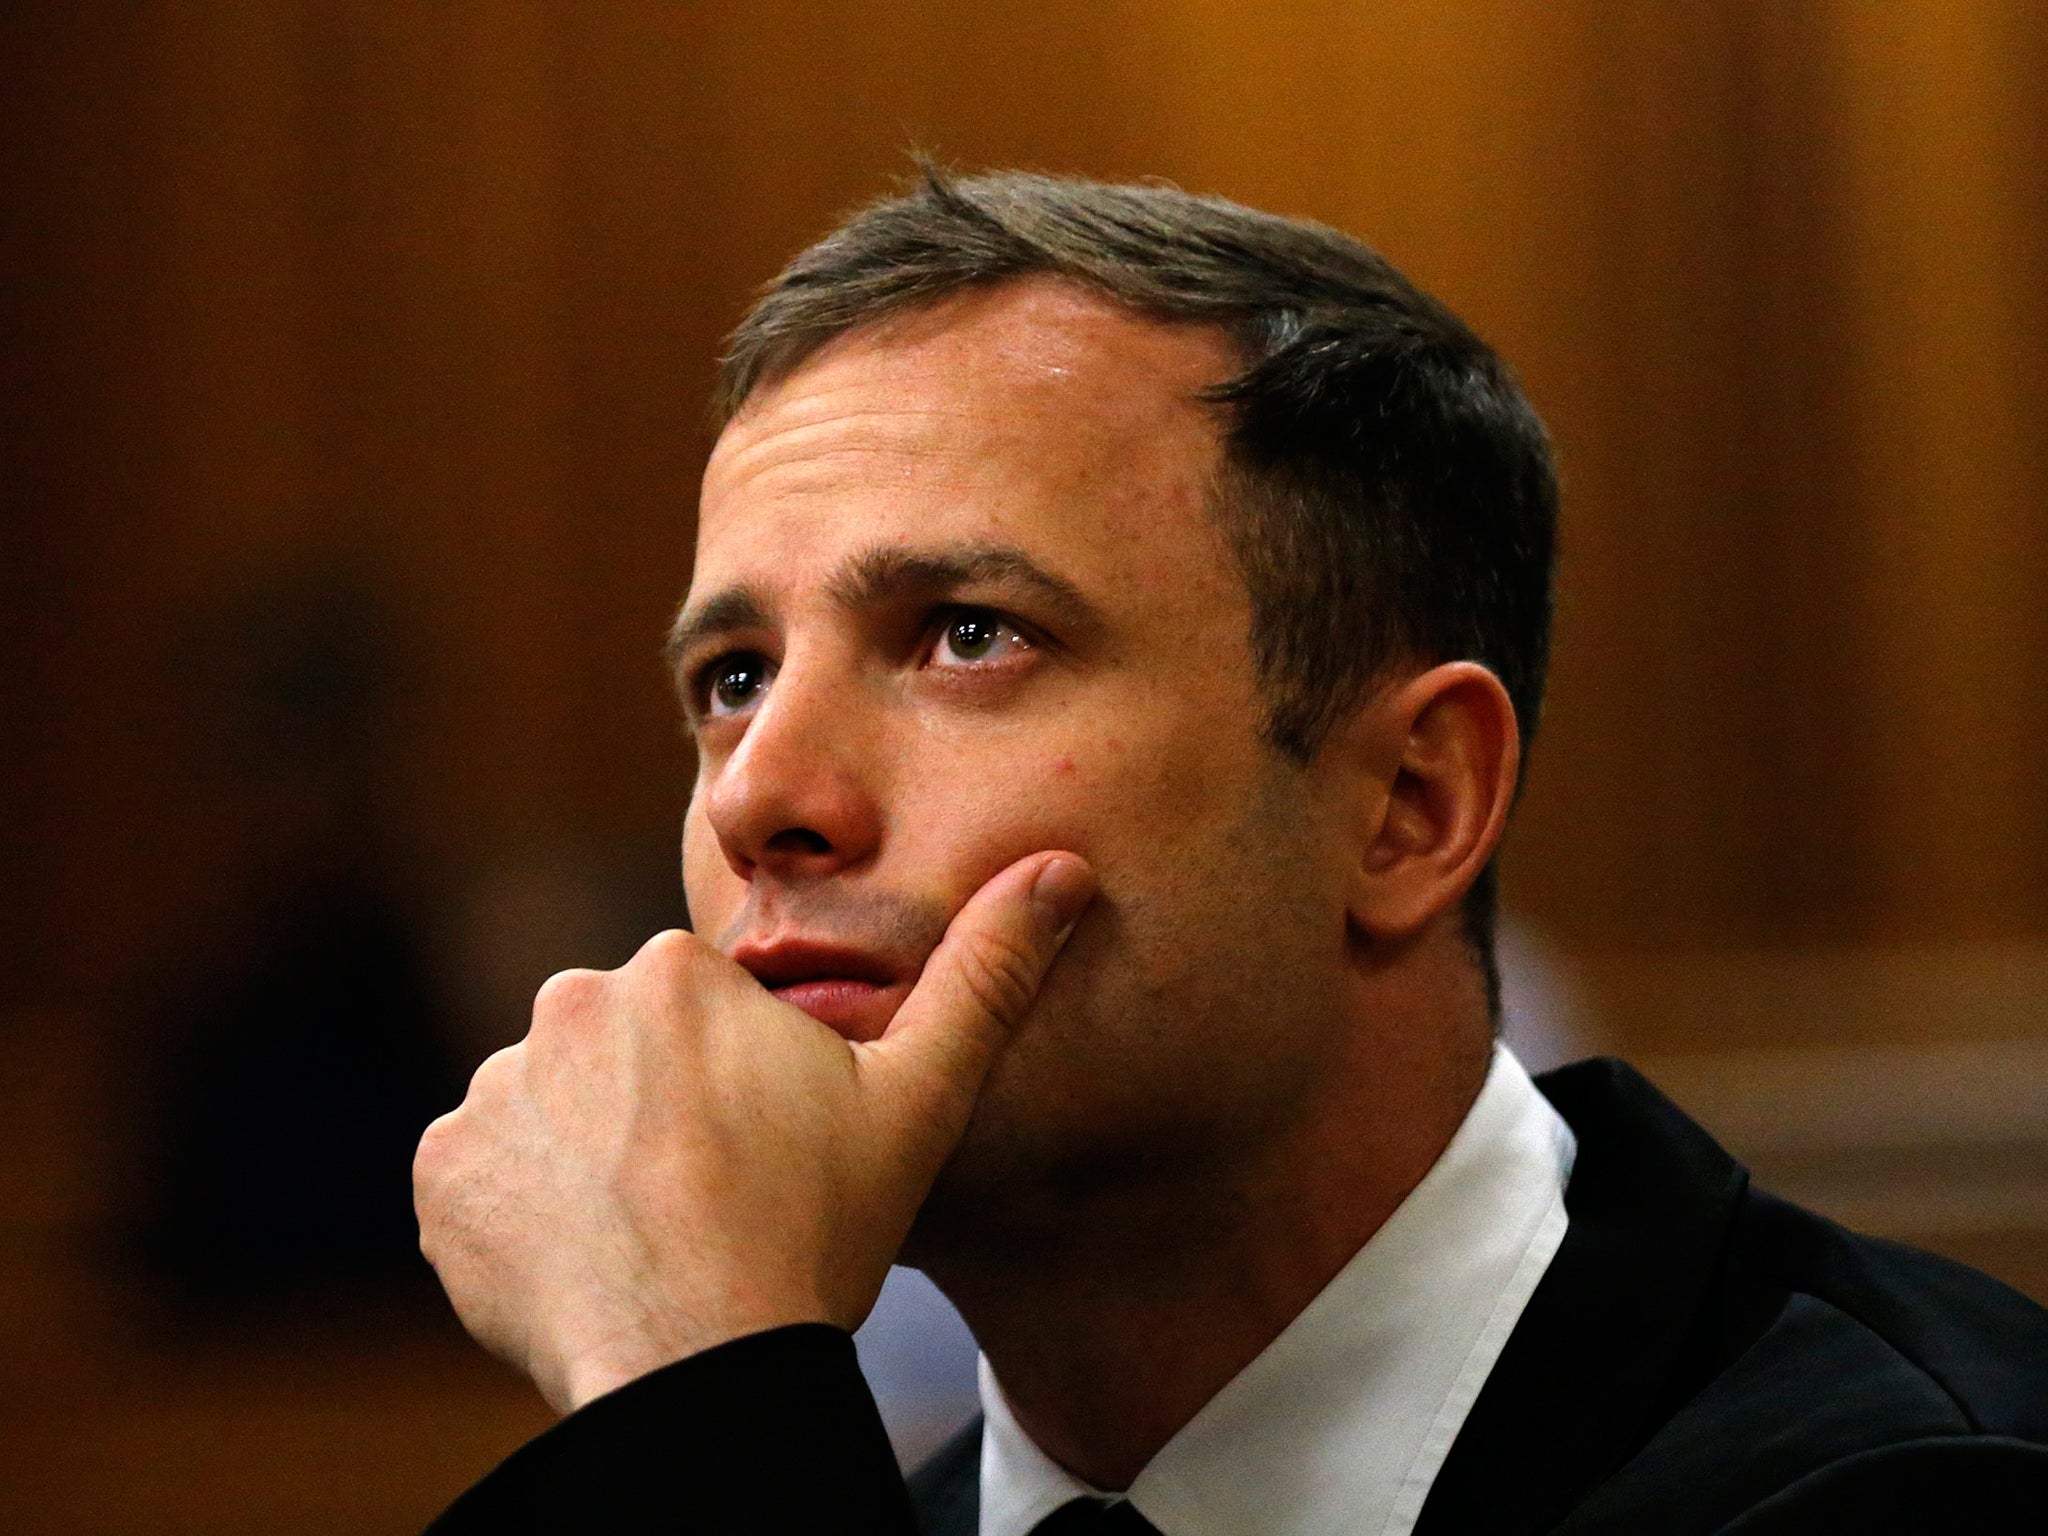 Oscar Pistorius in the dock during day four of sentencing procedures at the High Court in Pretoria